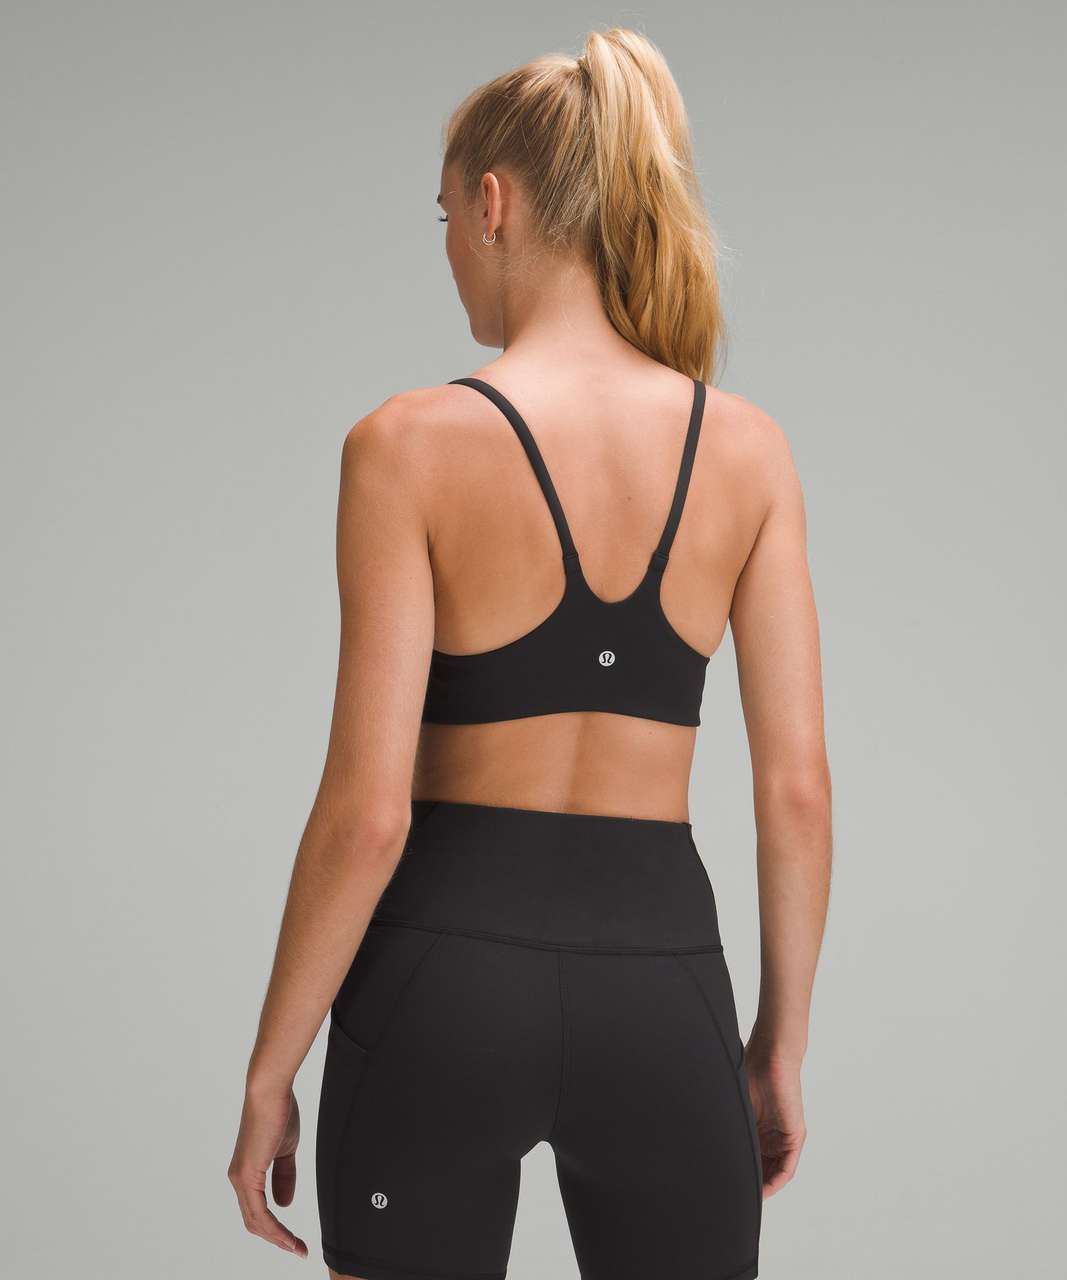 Lululemon Wunder Train Strappy Racer Bra *Light Support, A/B Cup - Black (Fourth Release)